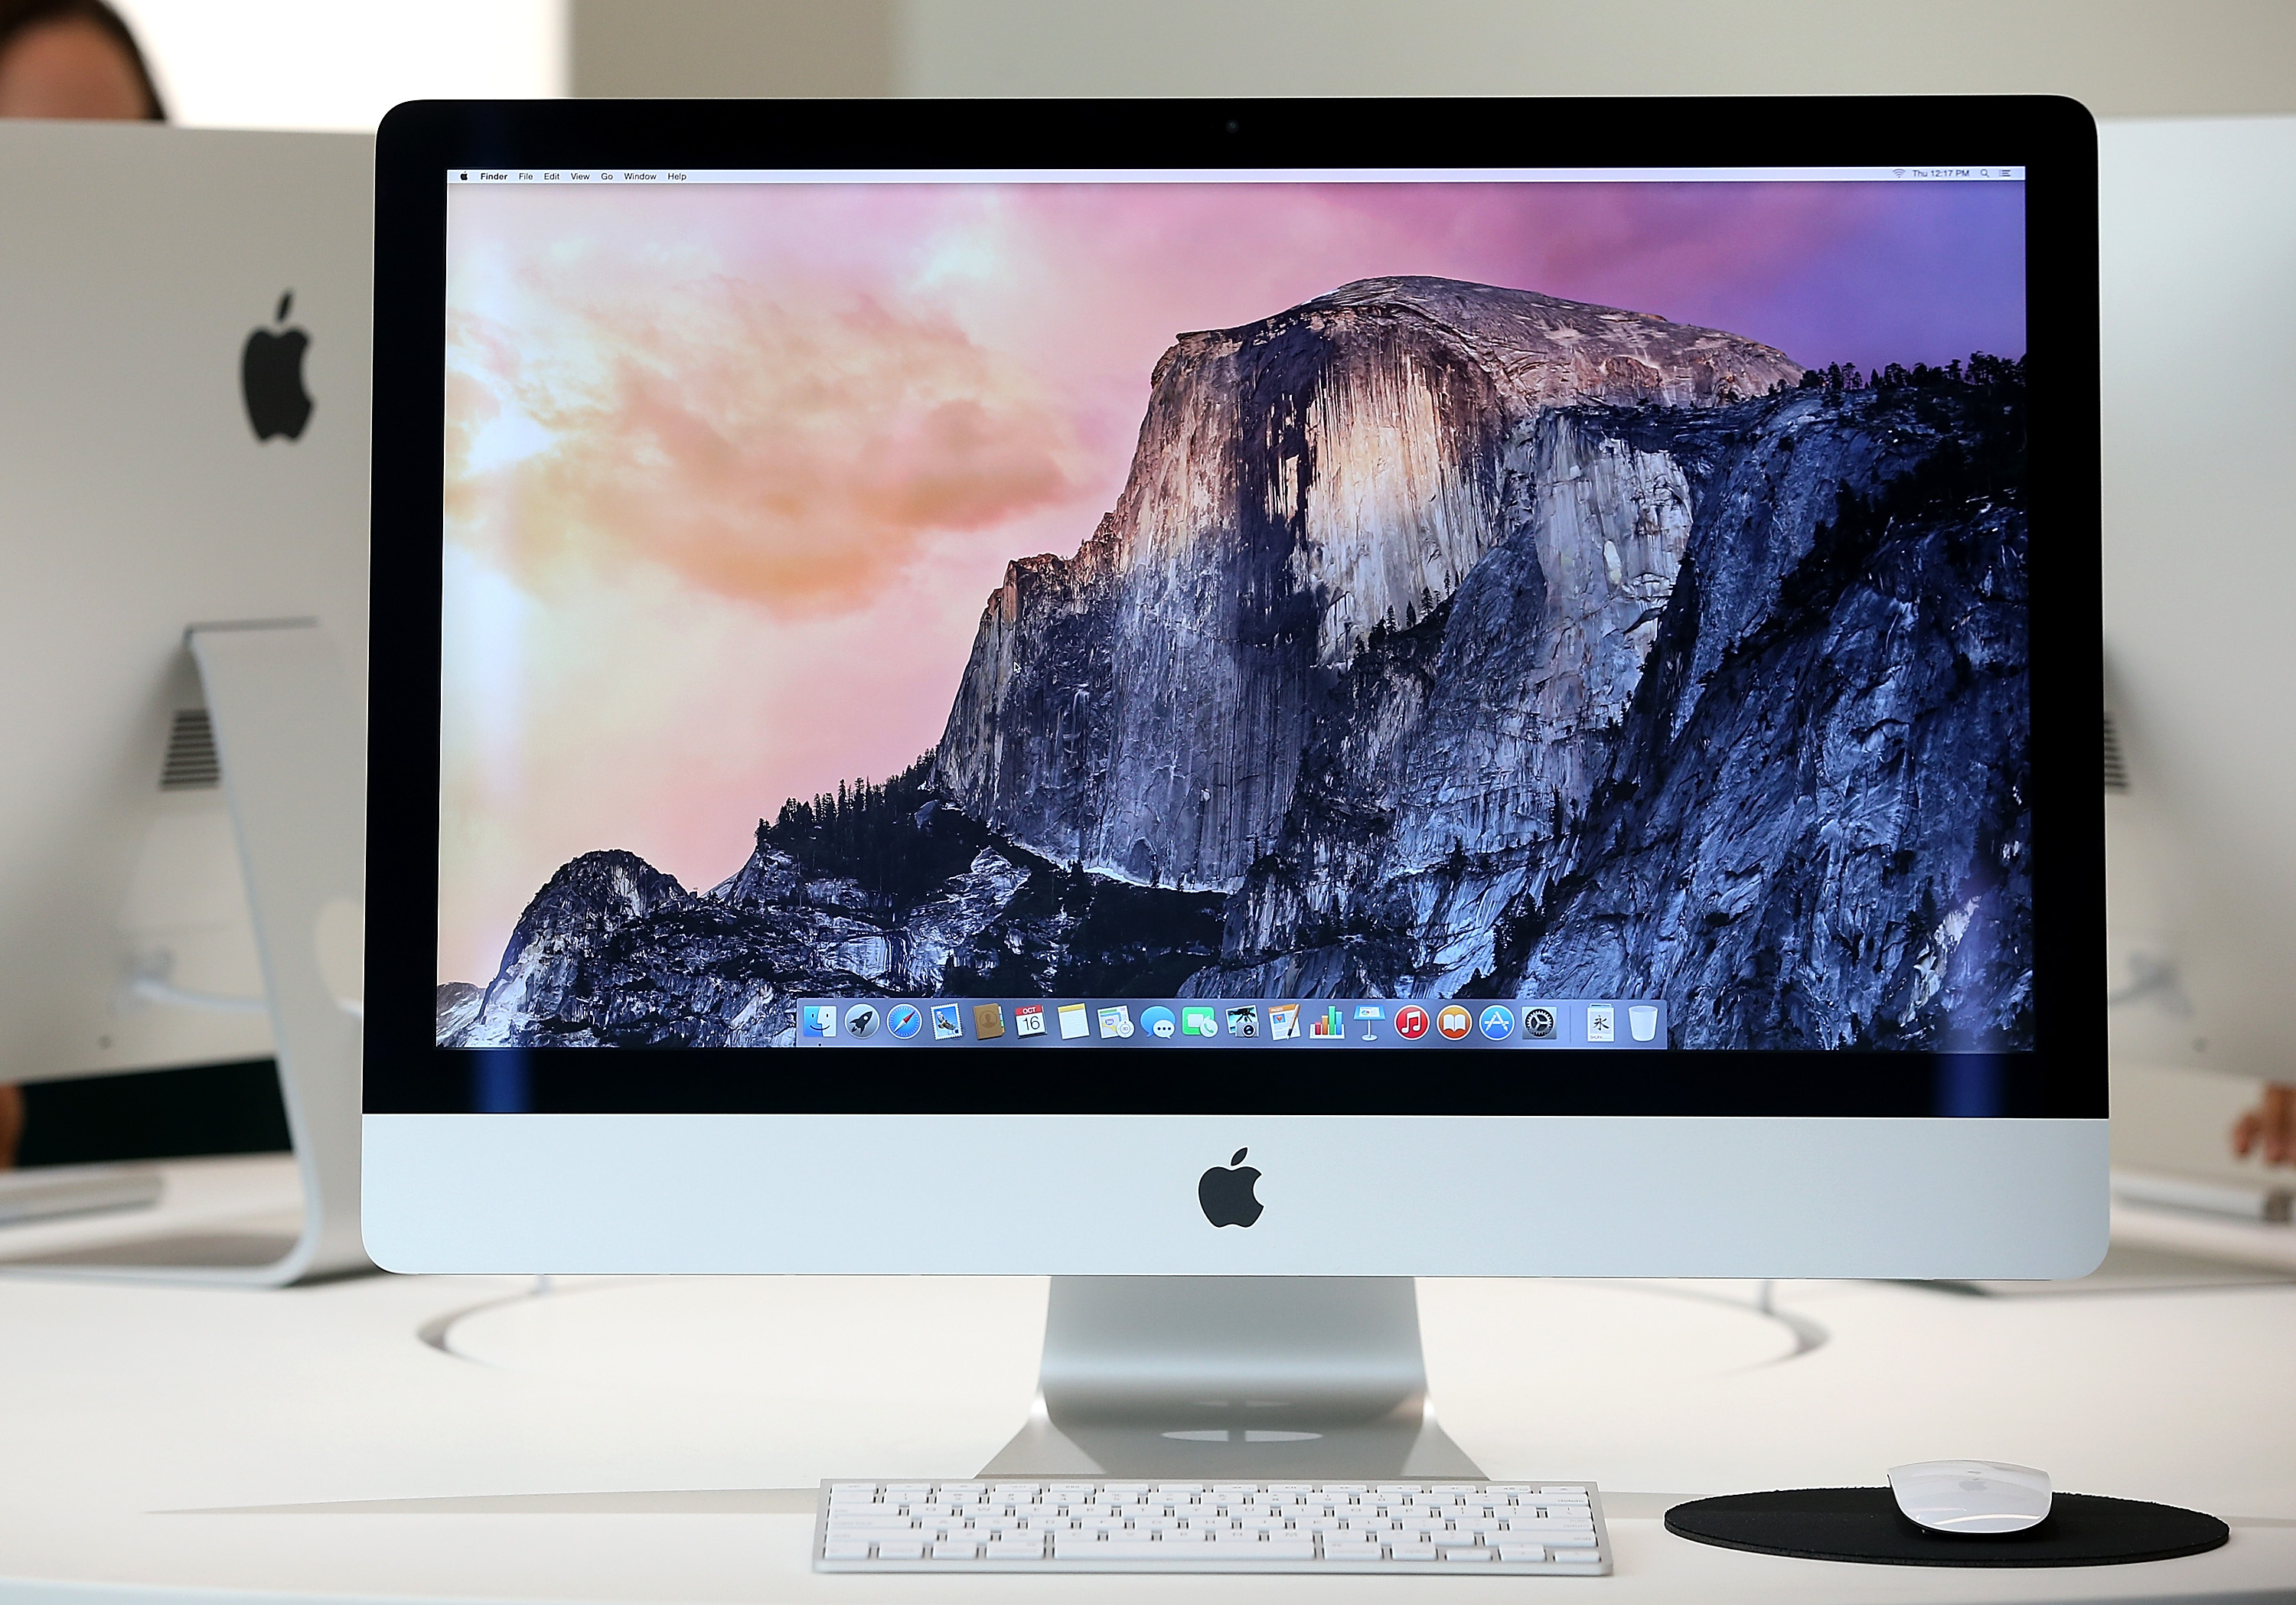 The new 27 inch iMac with 5K Retina display is displayed during an Apple special event on October 16, 2014 in Cupertino, California. (Justin Sullivan&mdash;Getty Images)